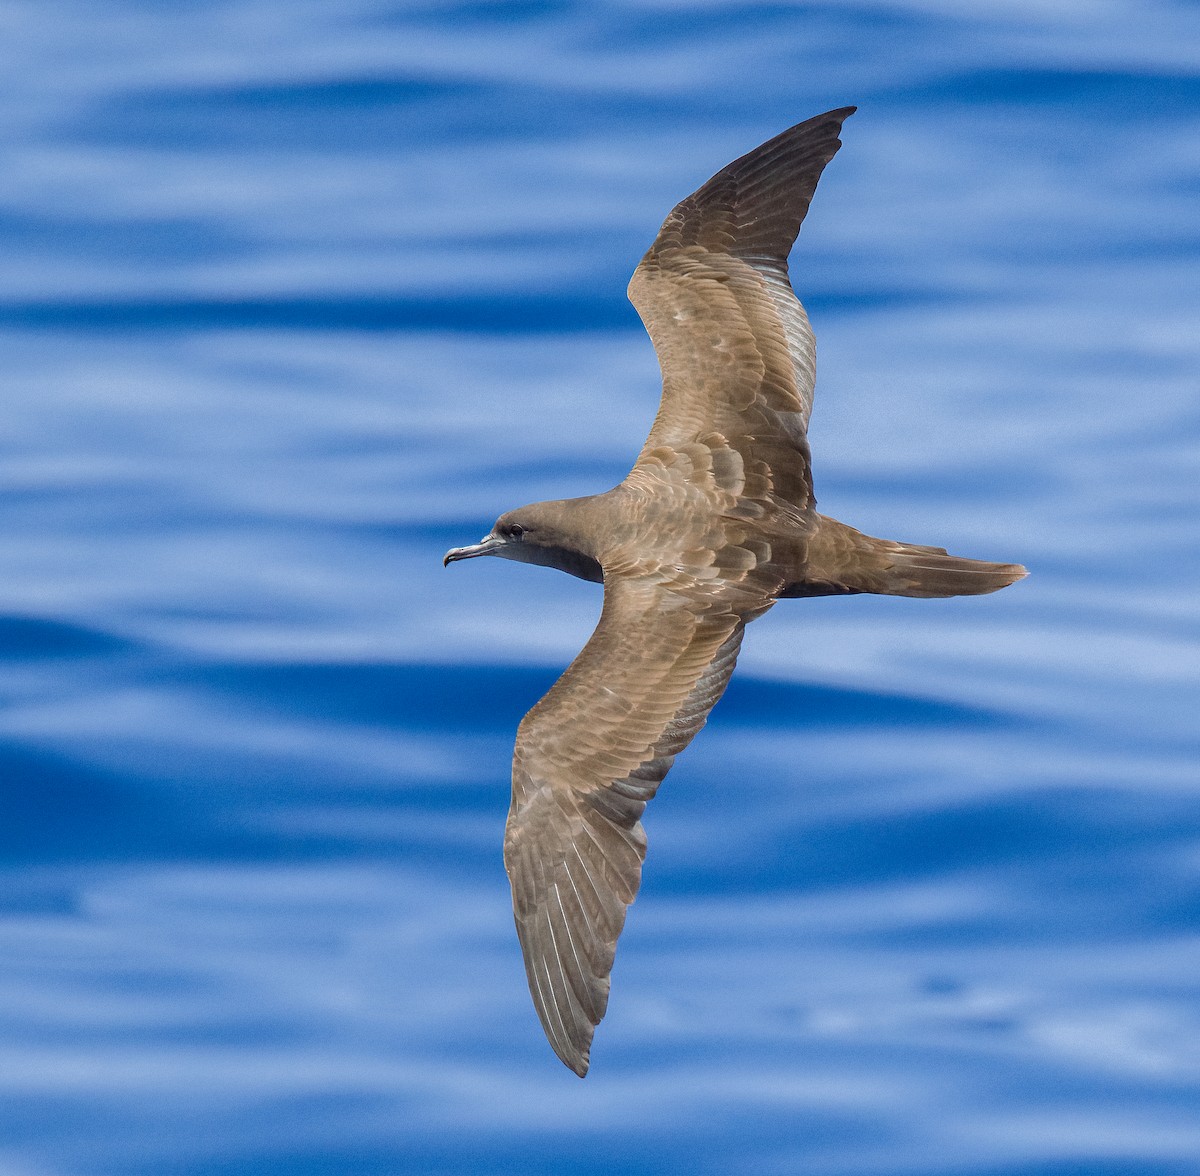 Wedge-tailed Shearwater - Linus Blomqvist